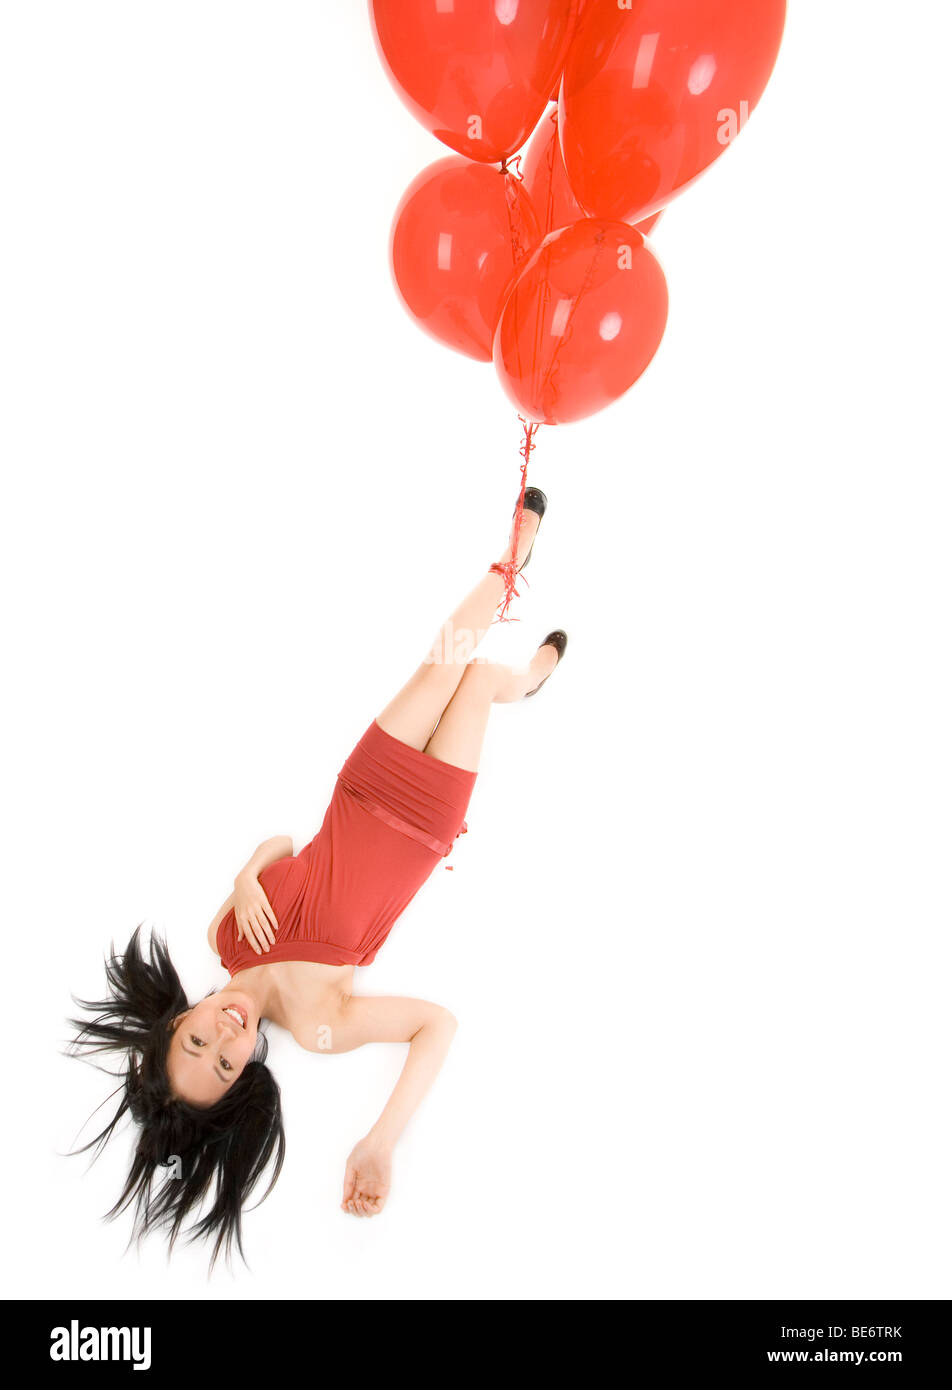 girl with red balloons flingy head over heels Stock Photo